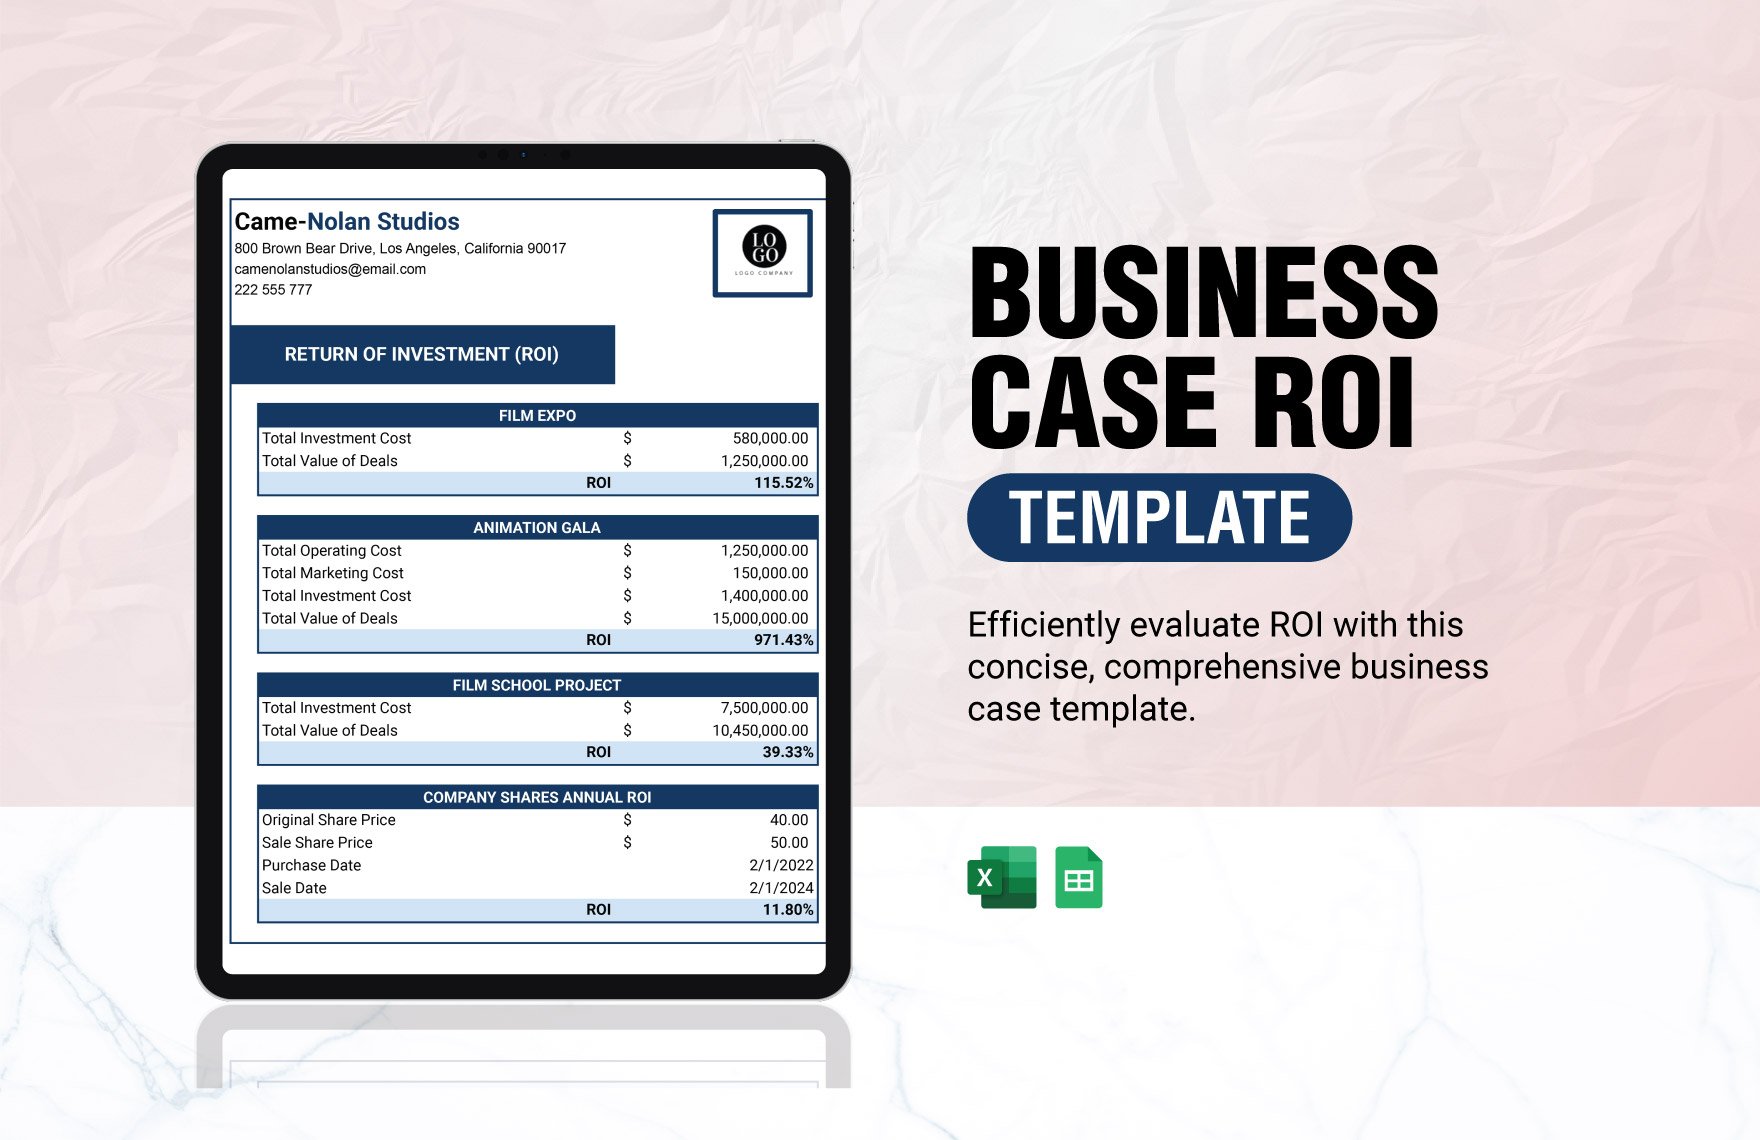 Business Case ROI Template